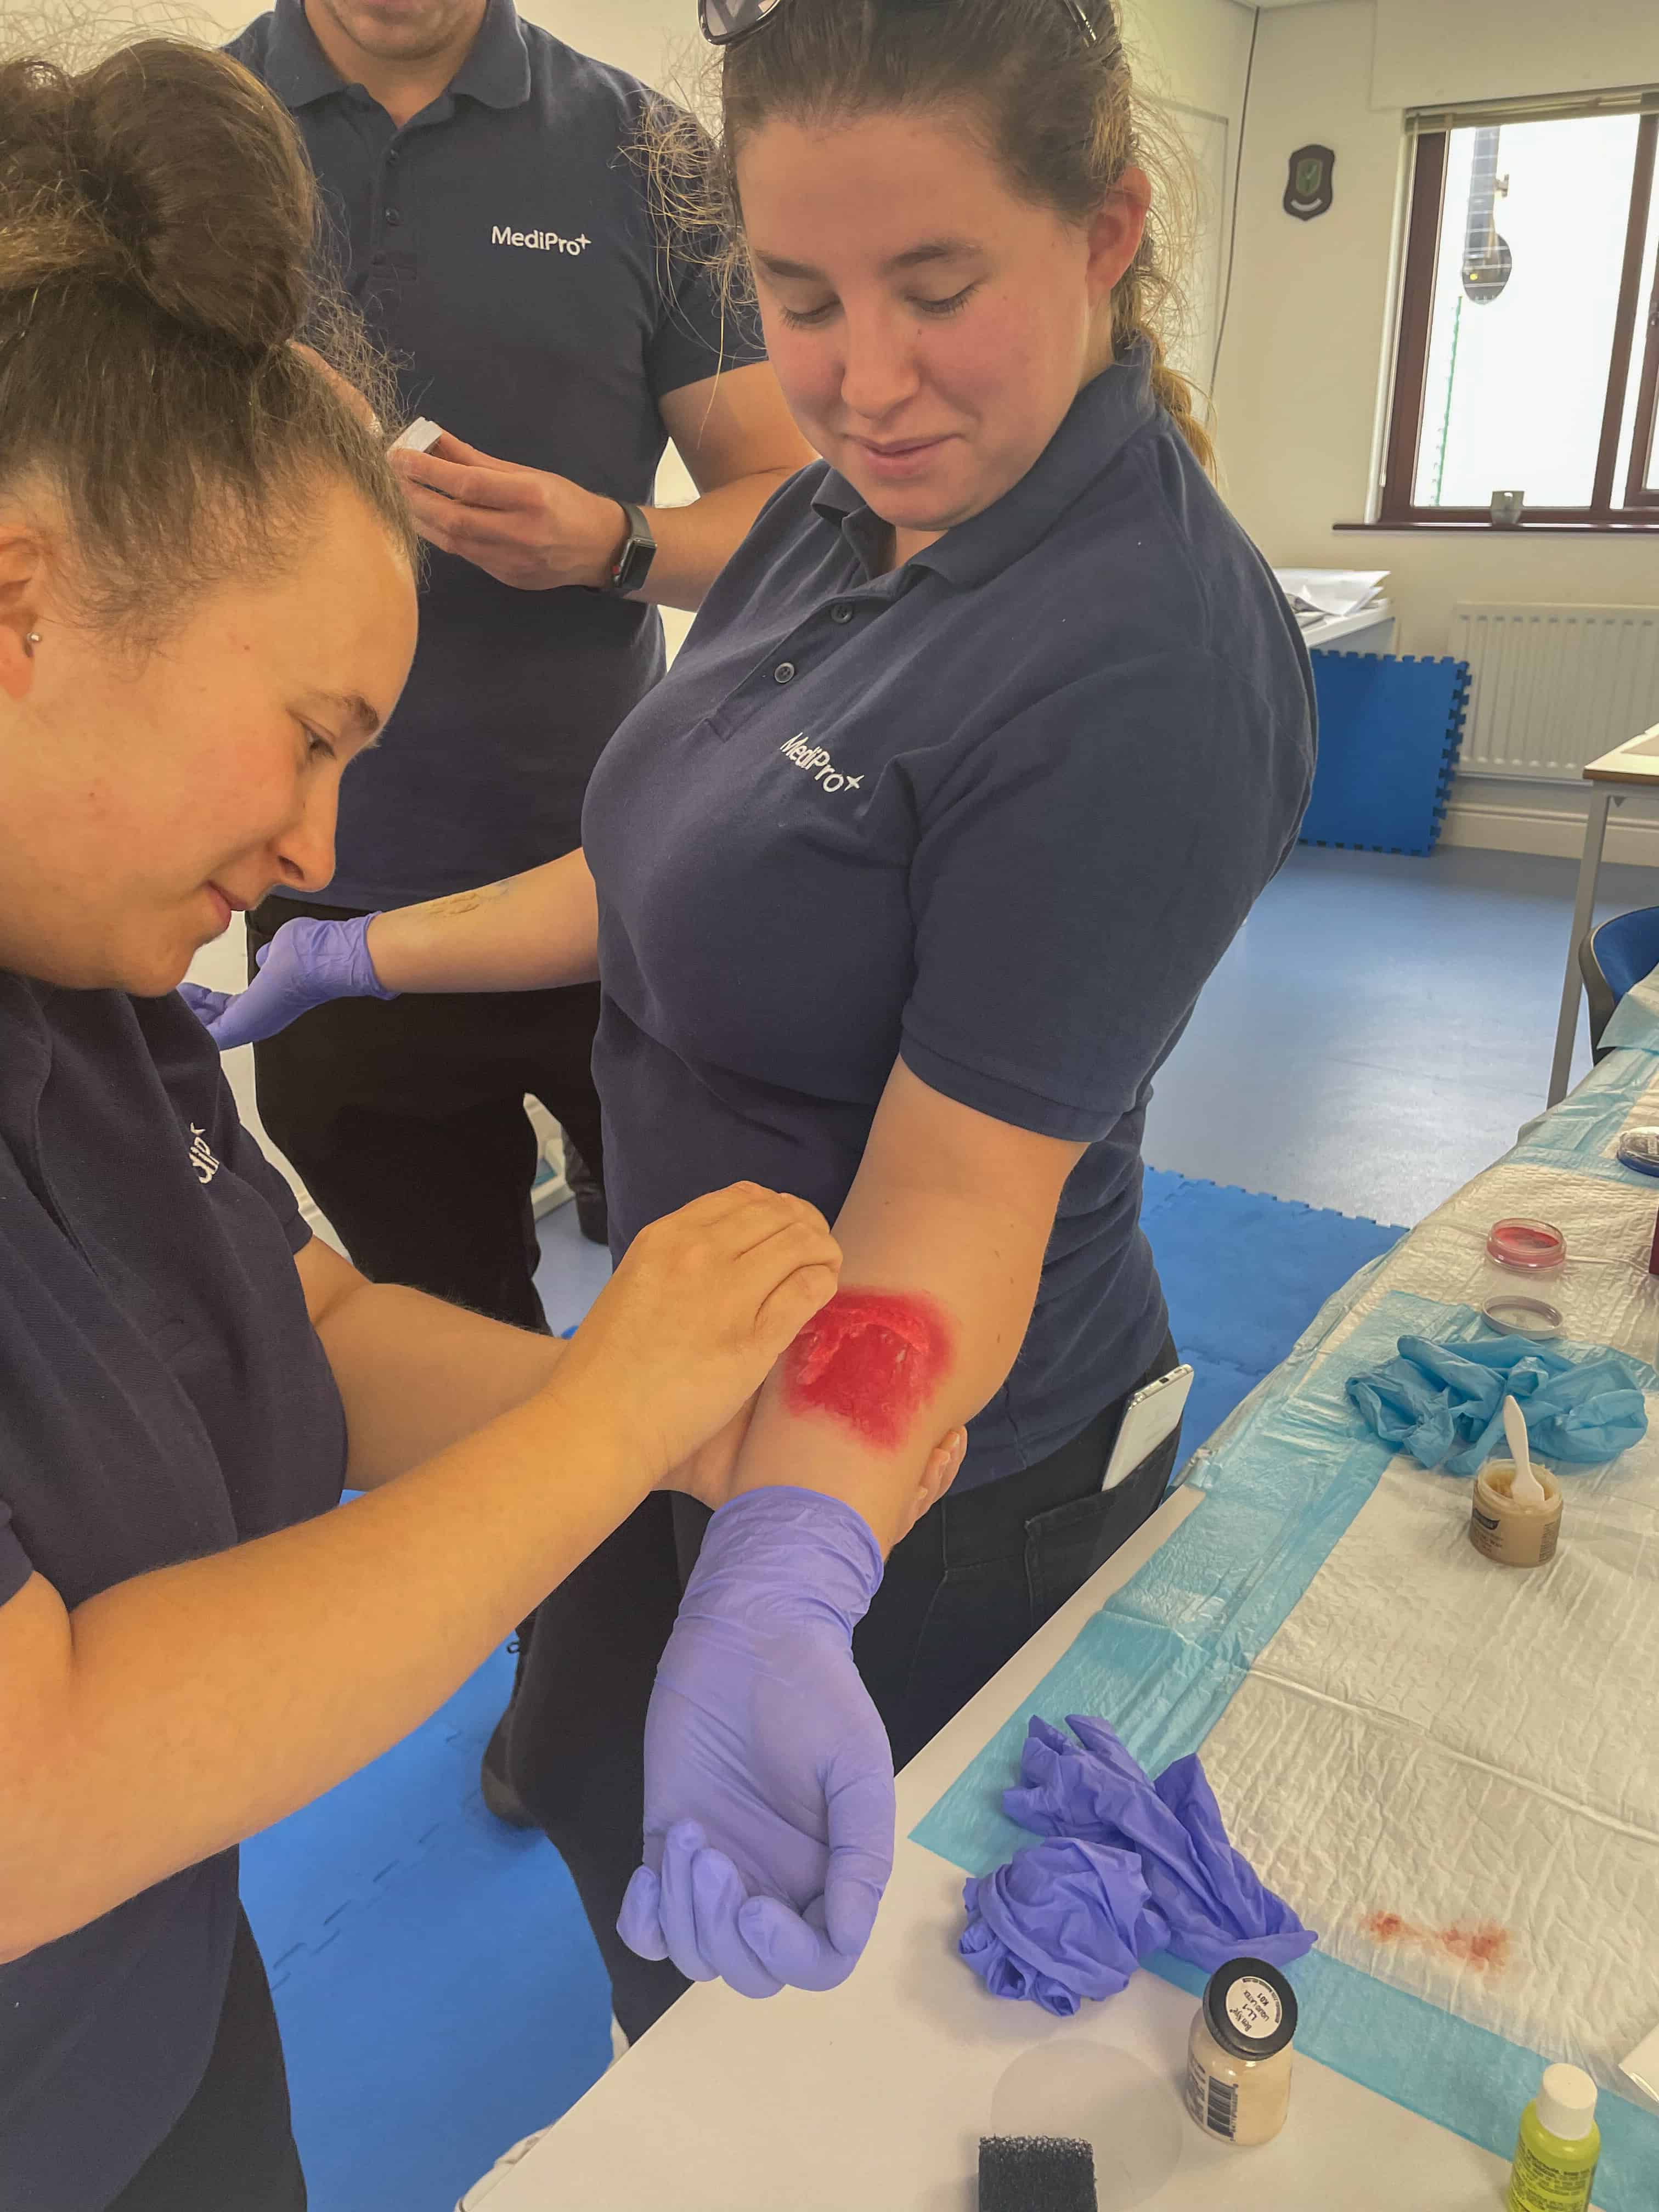 Our clinical tutors covering surgical airways  as part of a training day and using moulage make-up kits to teach simulations.